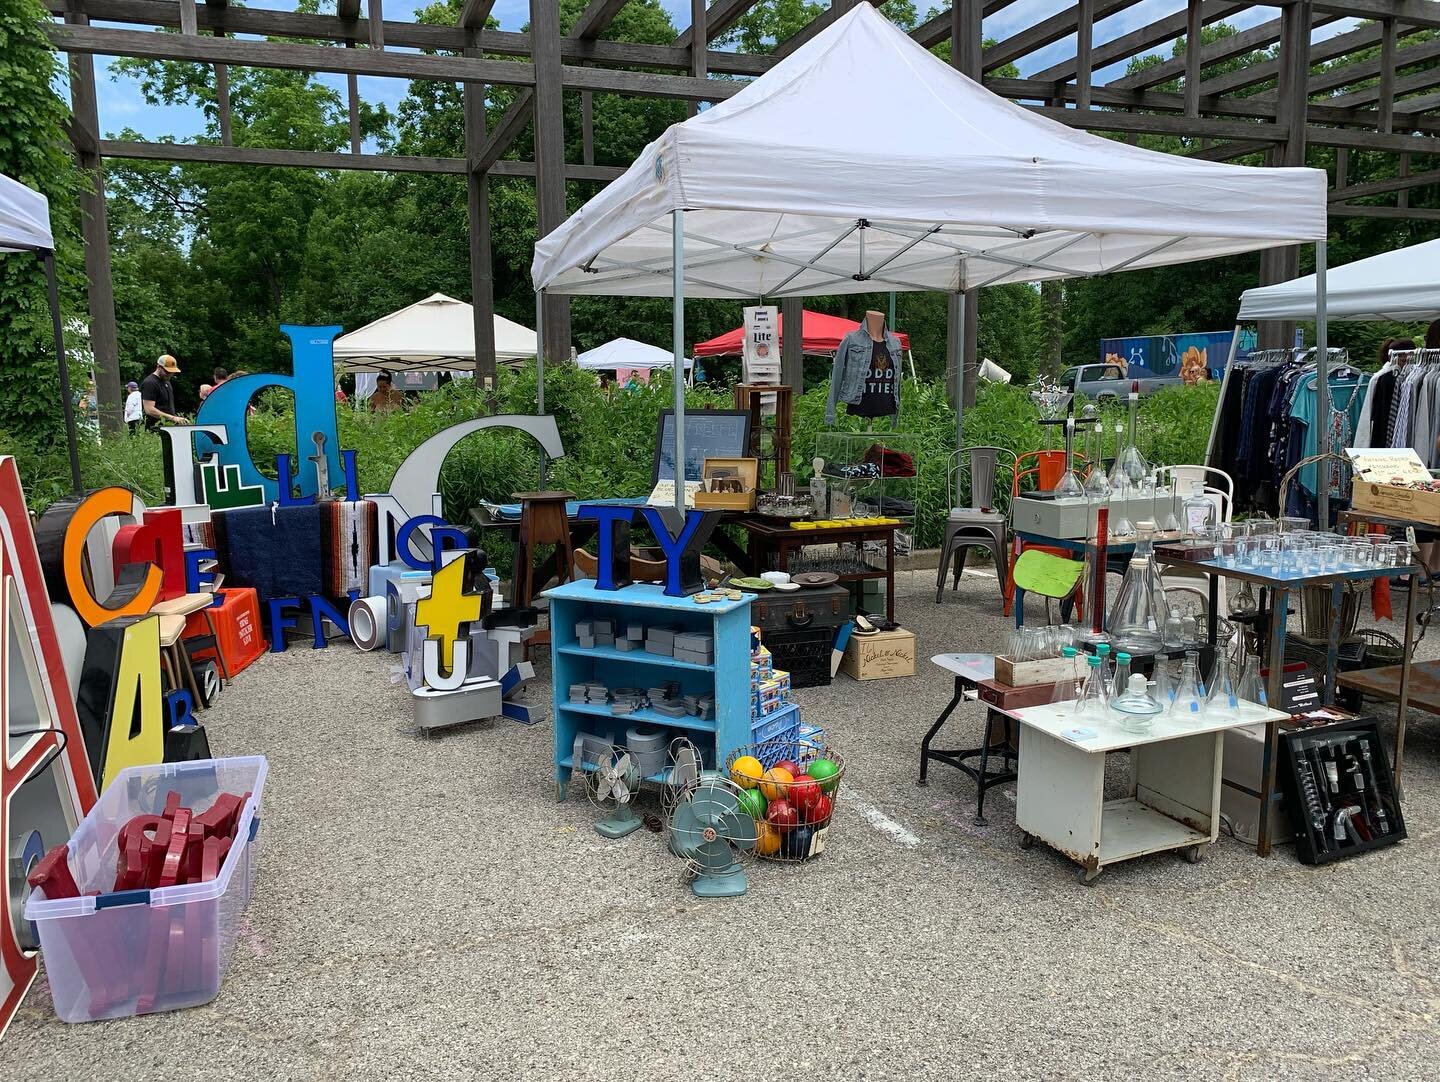 We&rsquo;re all set up!  Stop by the @indyurbanmarket in Broad Ripple / Art Center and check out the market!  We&rsquo;ll be here until 5! #societyofsalvage #visualmerchandising #outdoormarket #indyurbanmarket